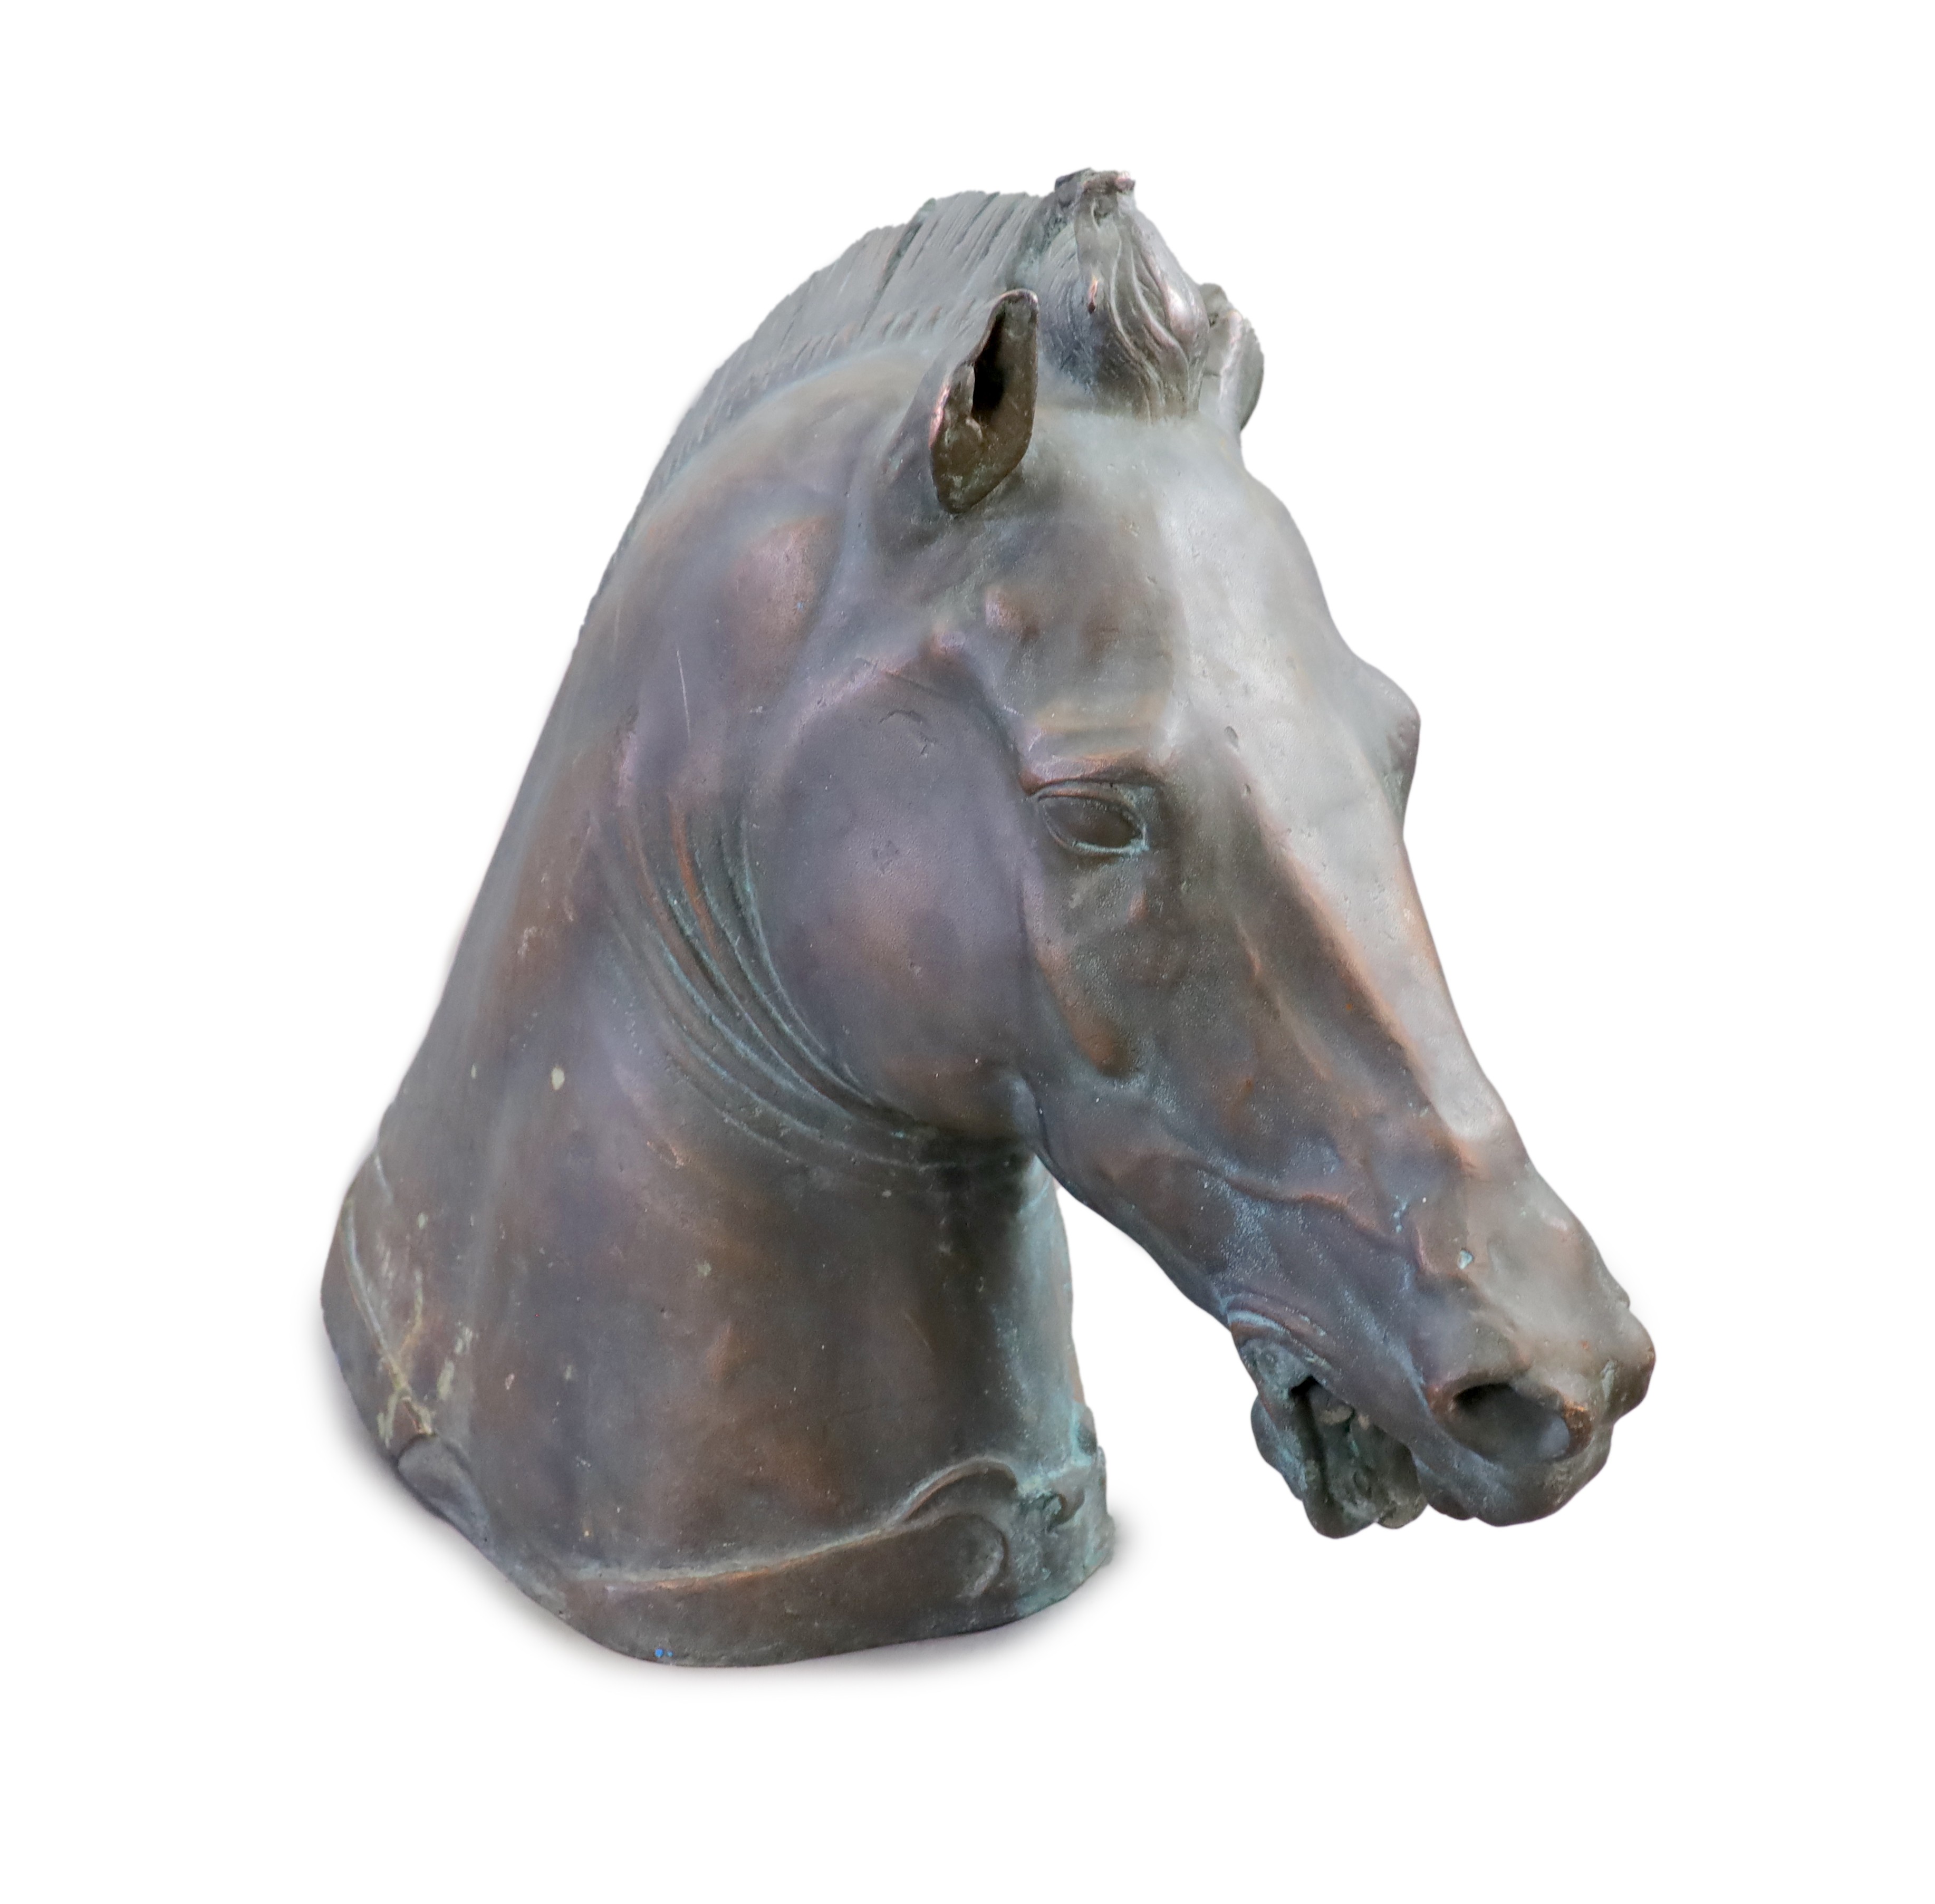 A large and impressive life-size bronze model after the Medici Riccardi horse’s head, 20th century 97cm long, 80cm high